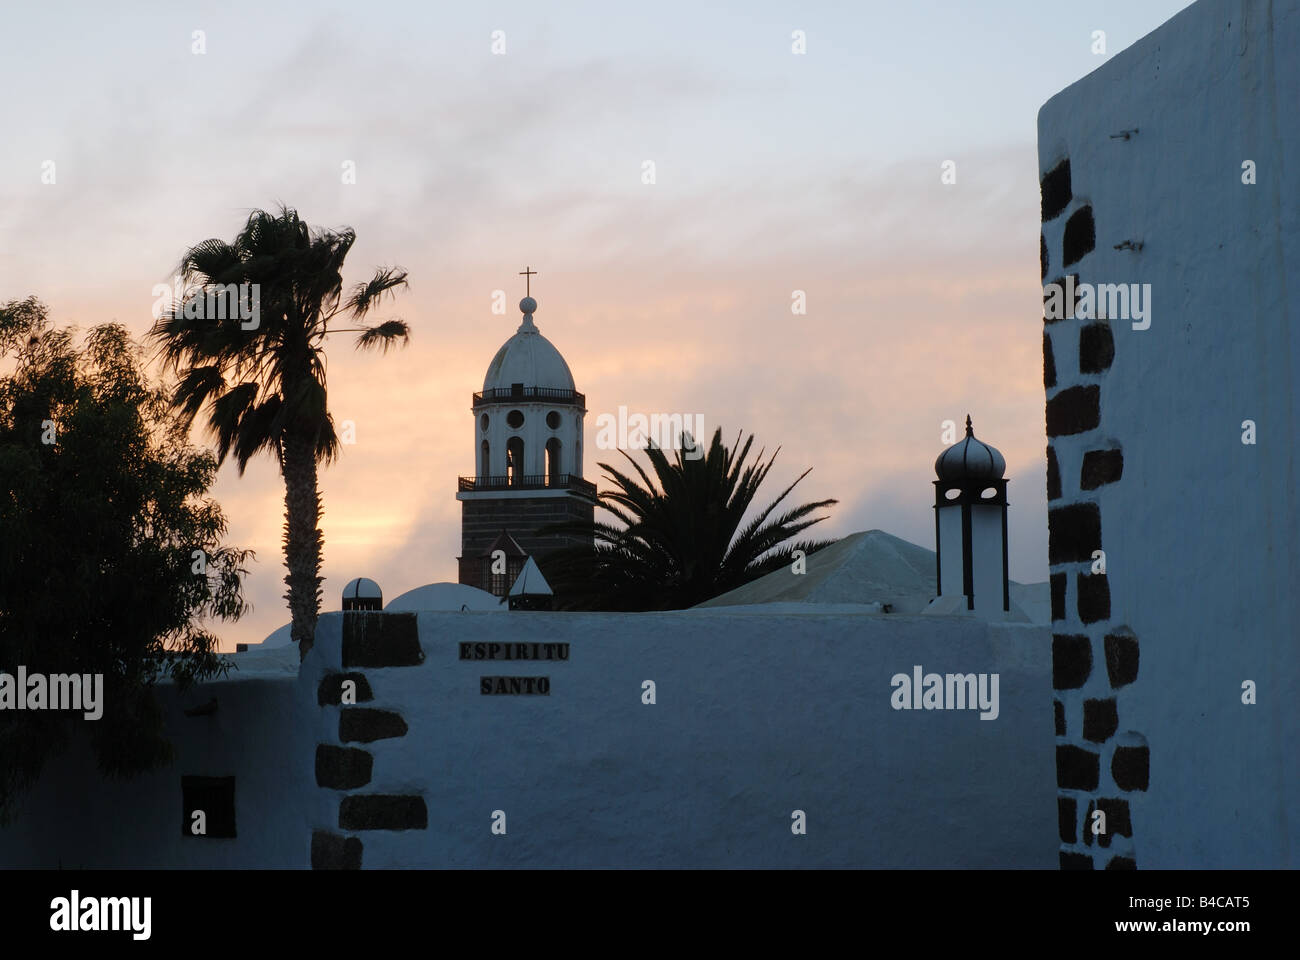 Teguise at sunset. Lanzarote island. Canary Islands. Spain. Stock Photo